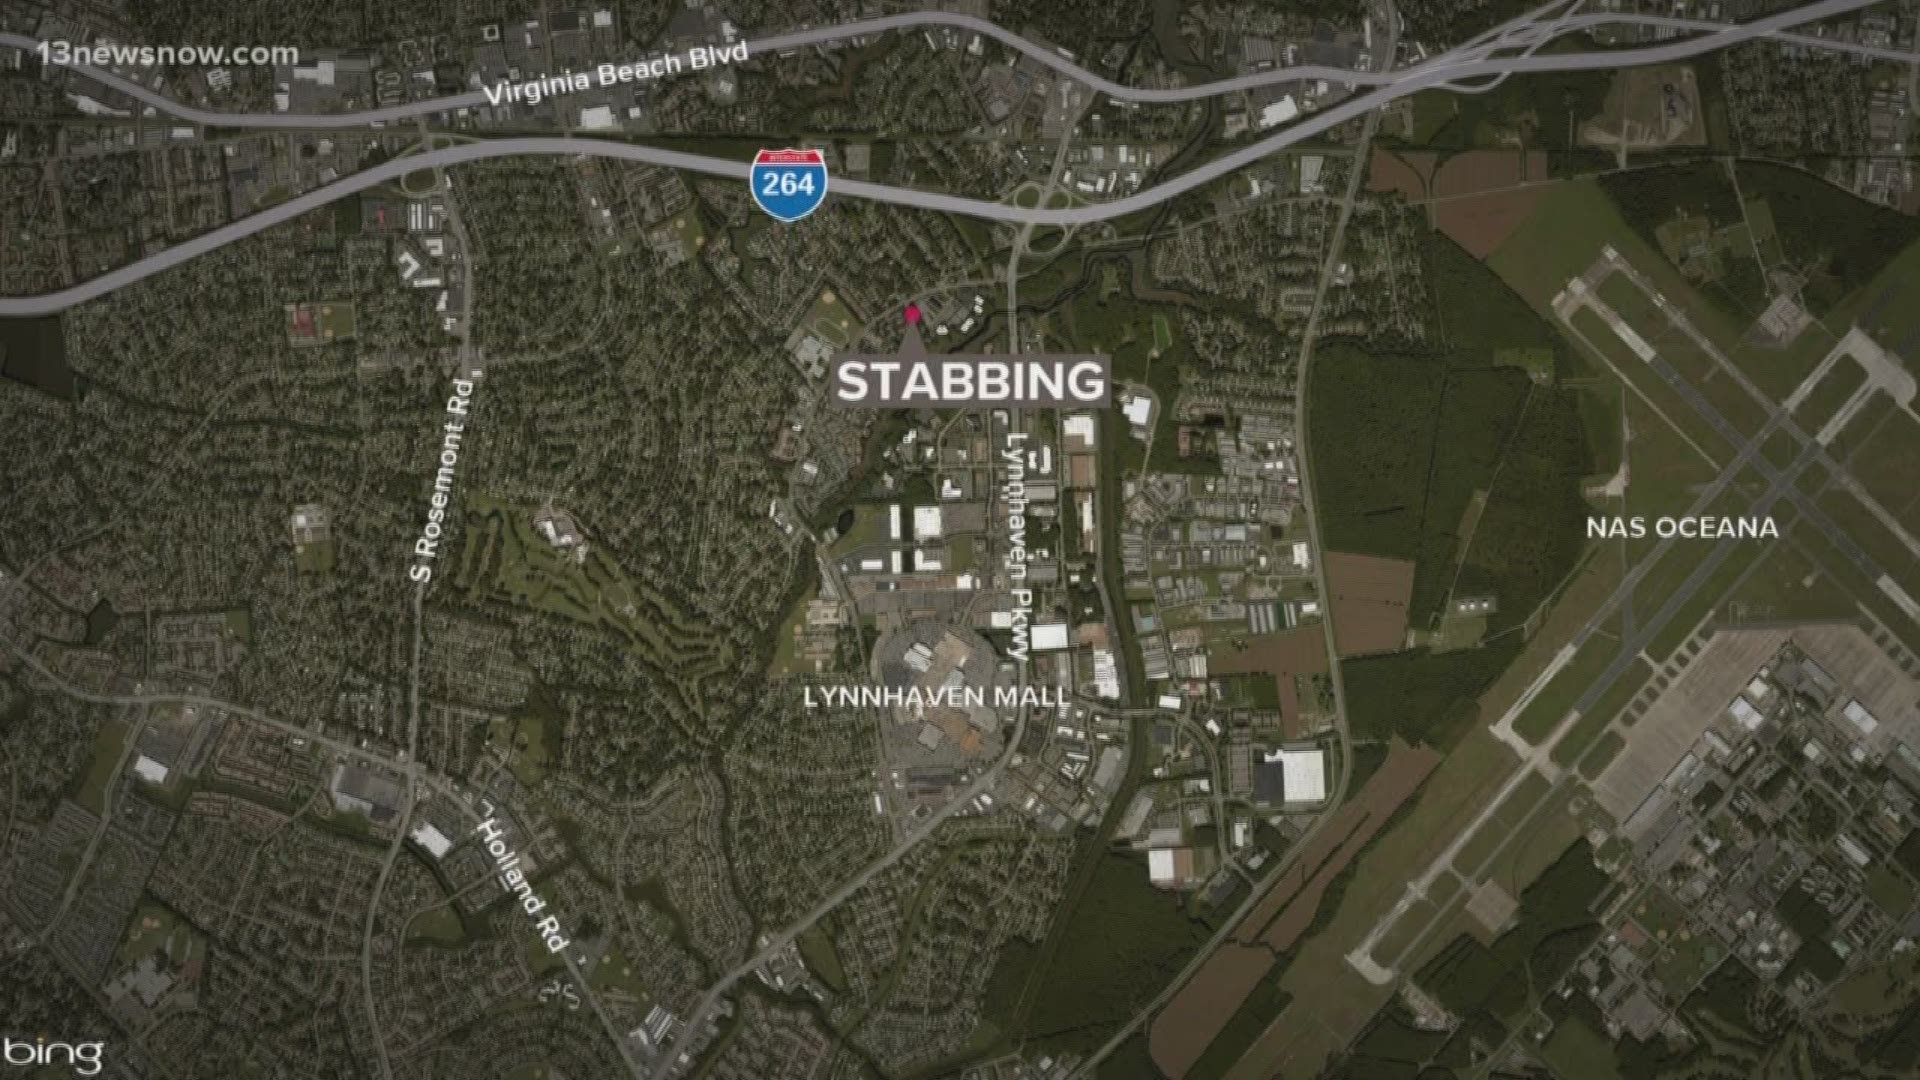 The man was stabbed in Virginia Beach. Another victim was taken to the hospital with minor cuts.